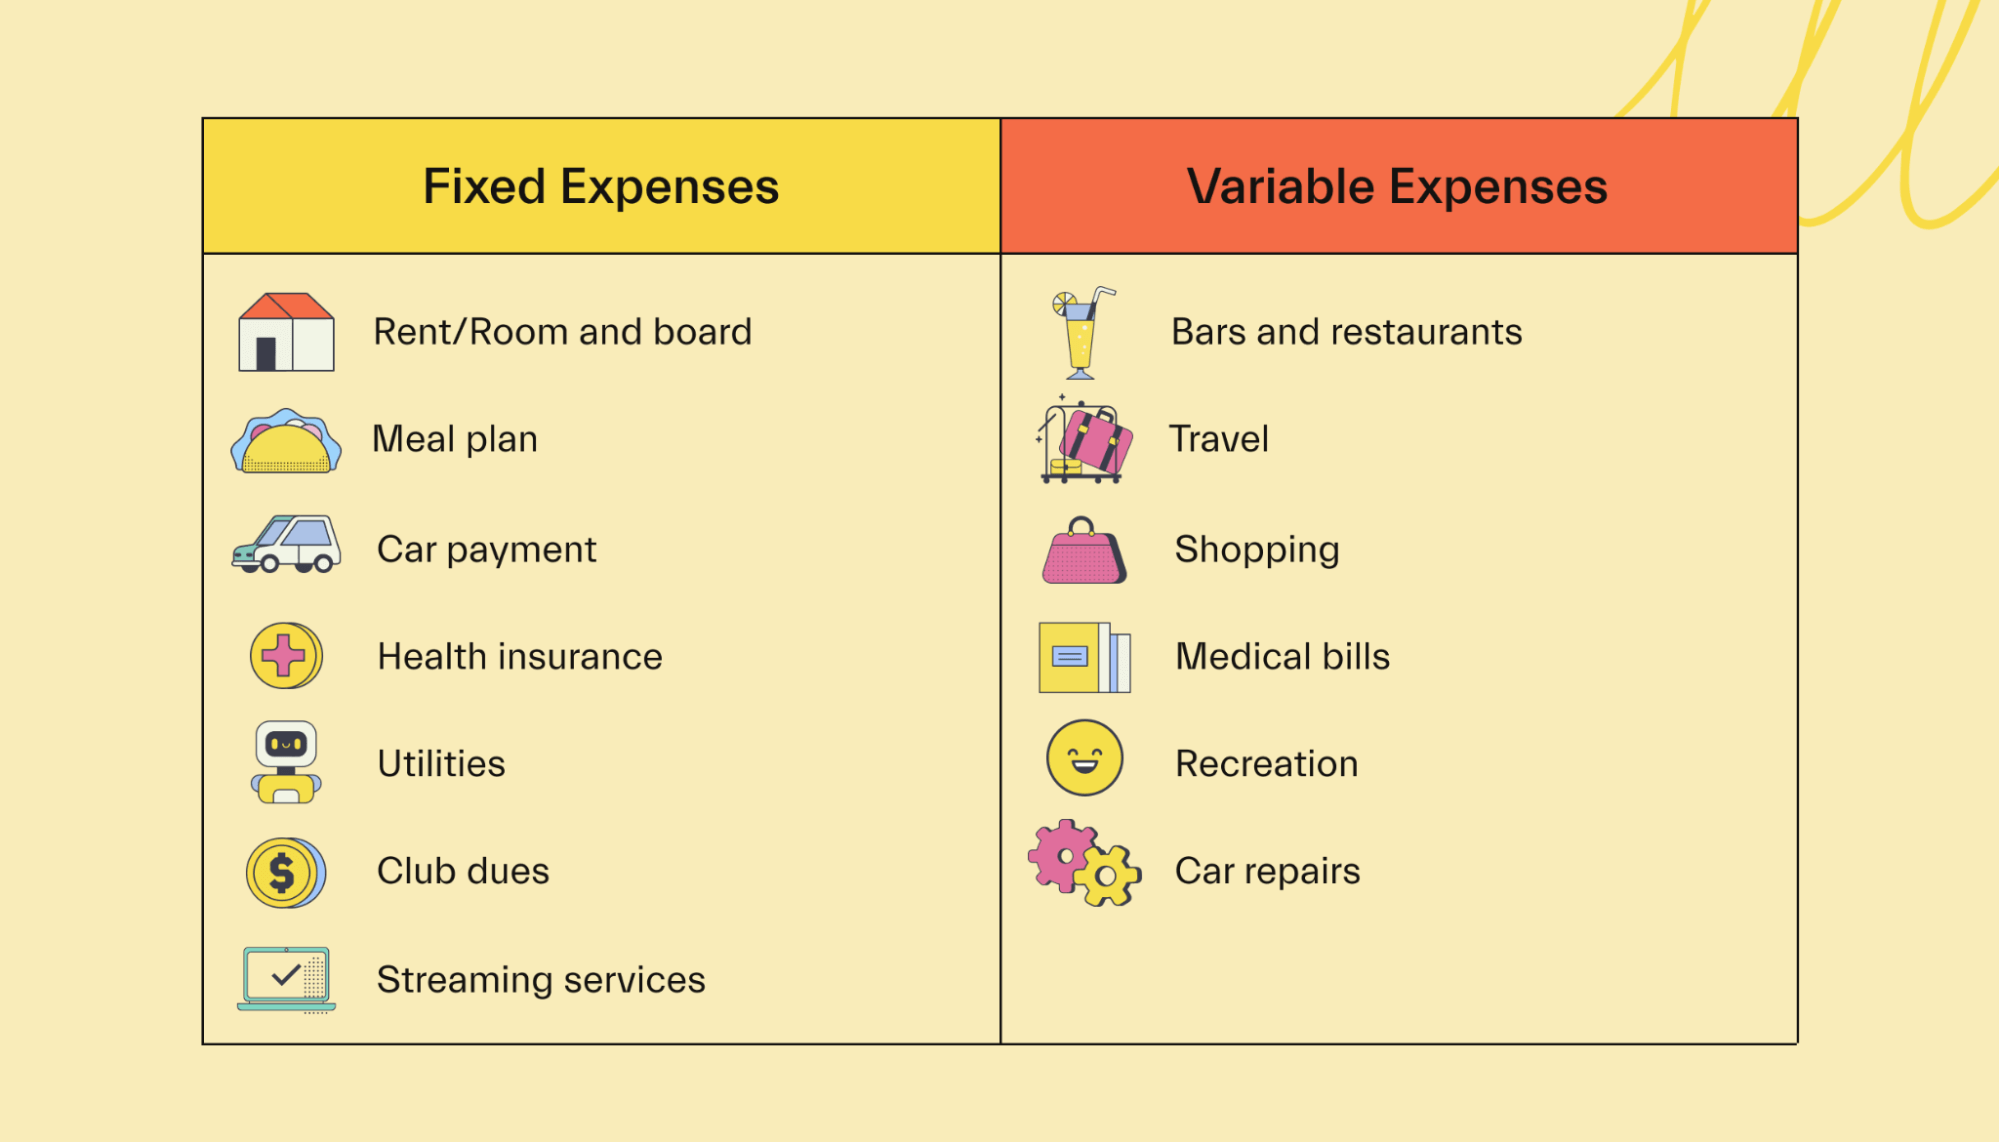 Fixed and Variable Expenses